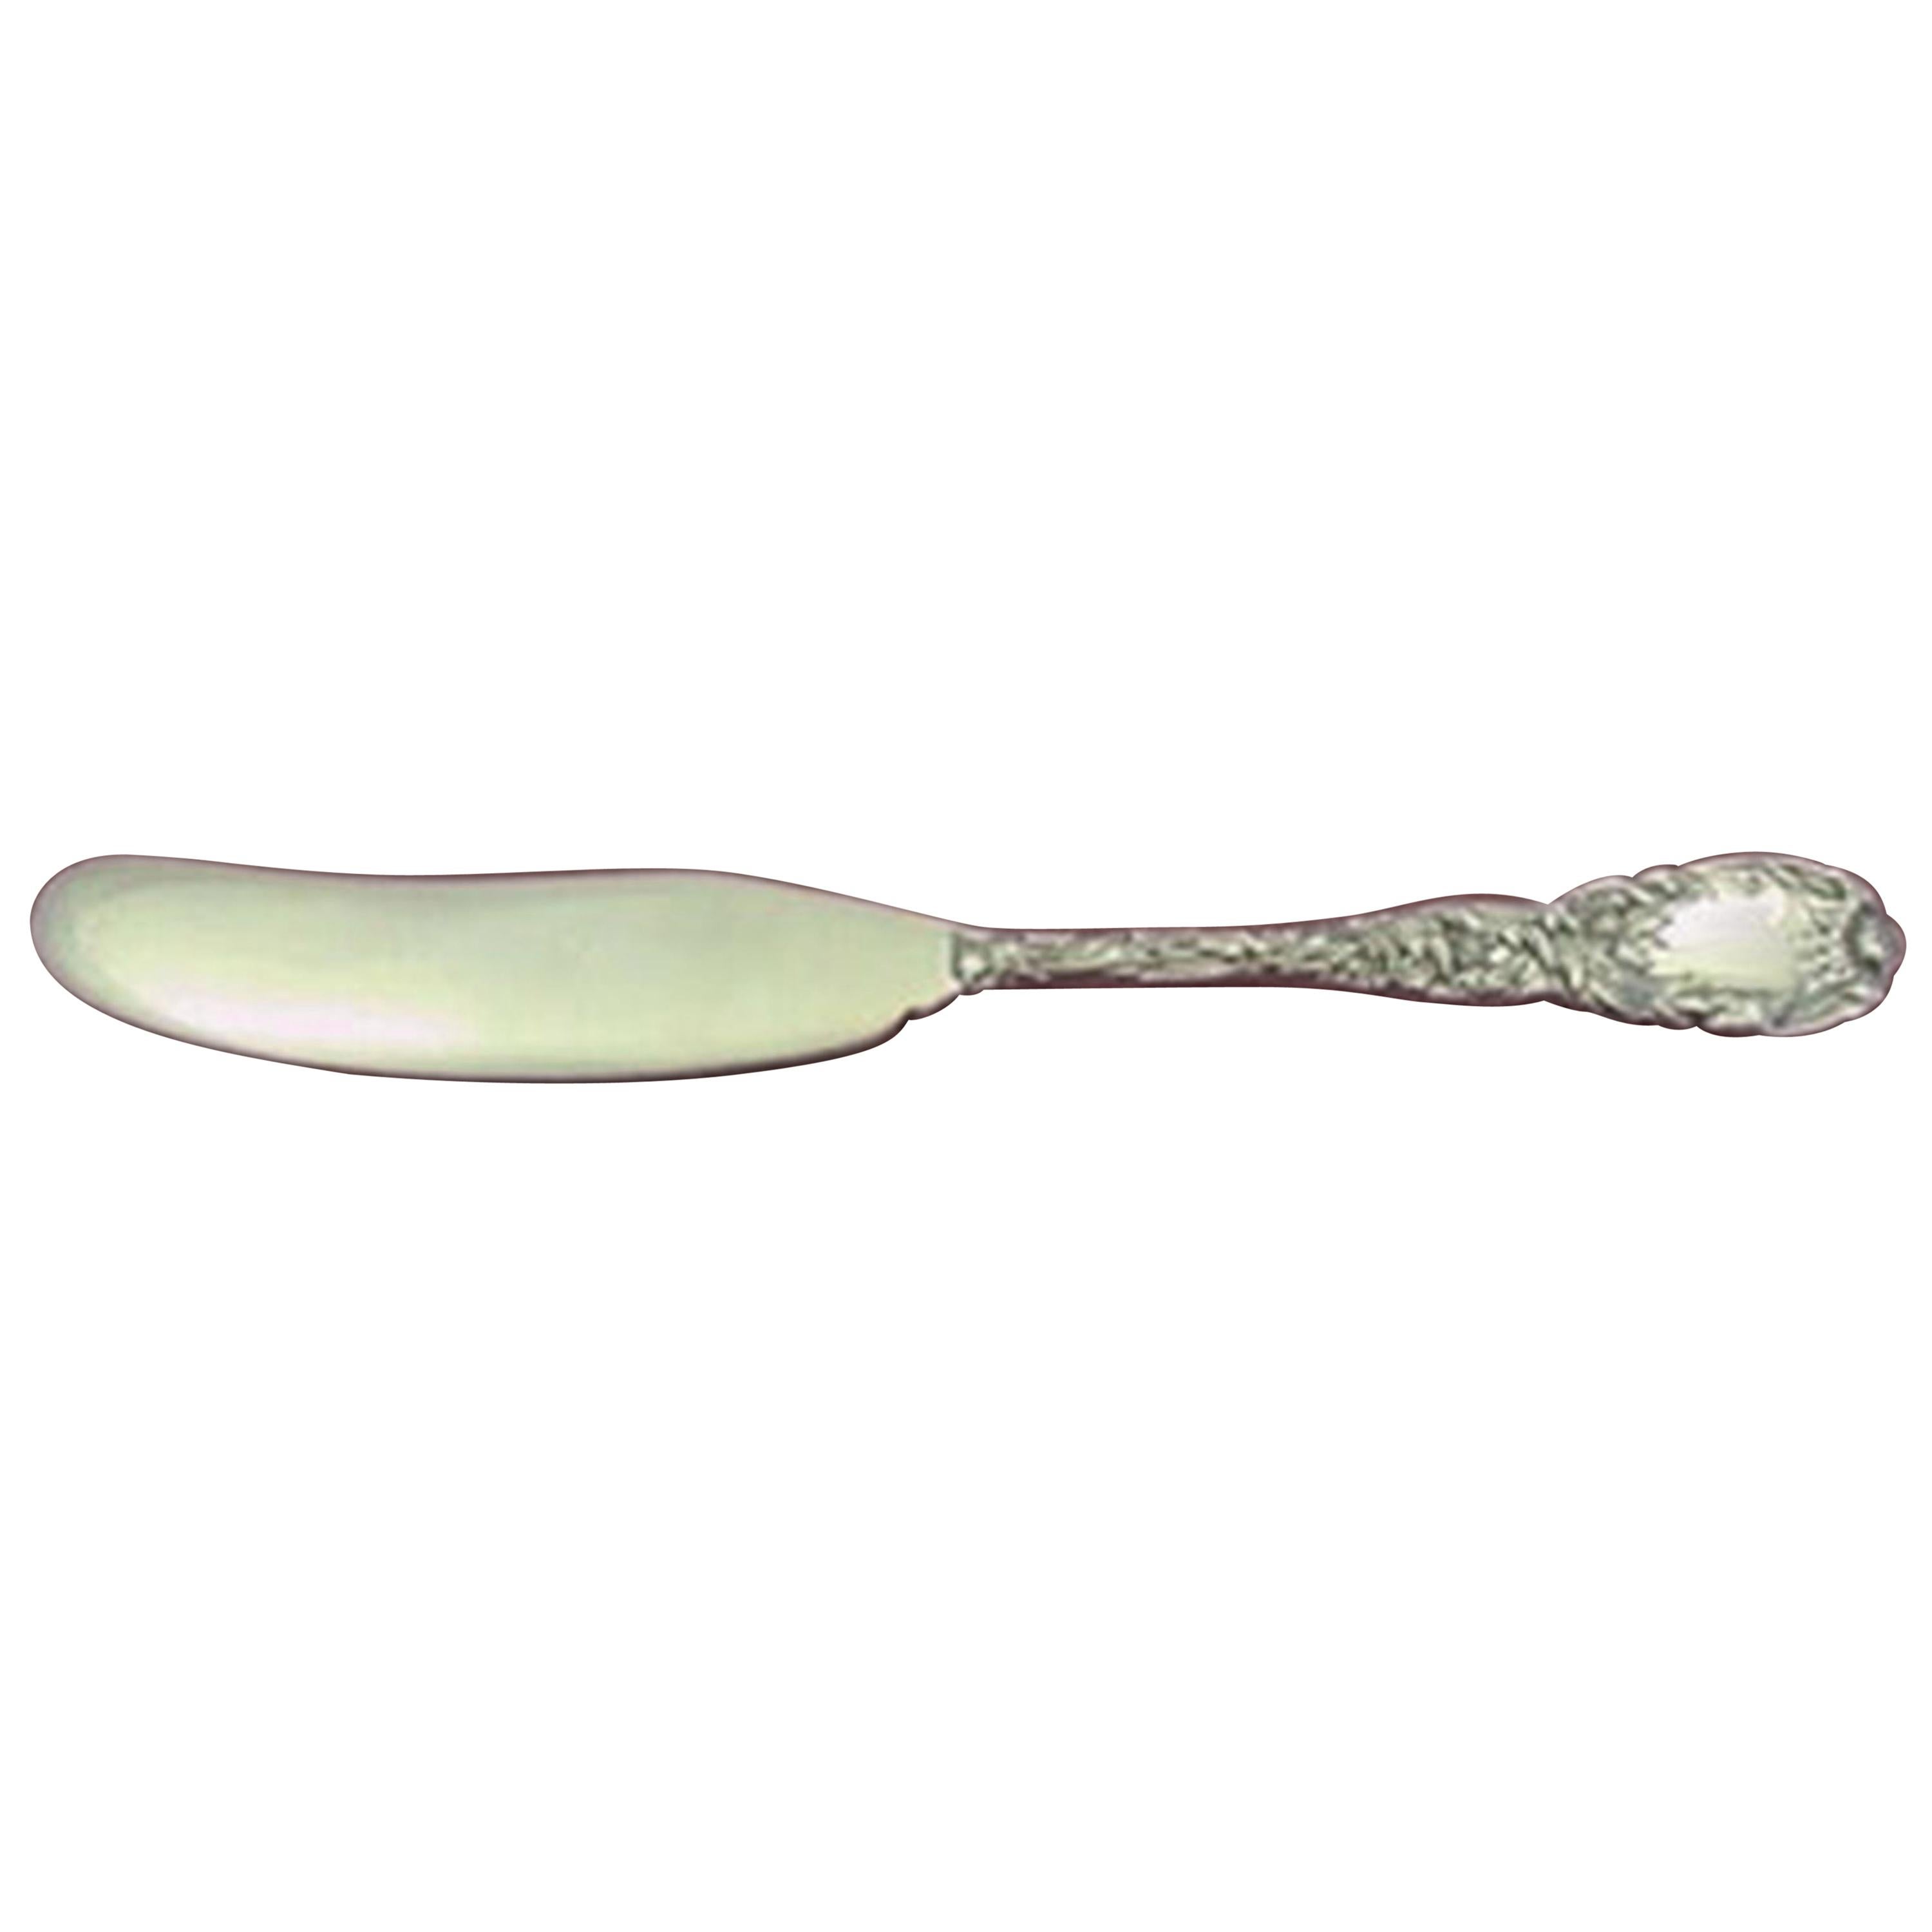 Chrysanthemum by Tiffany & Co. Sterling Silver Butter Spreader FH